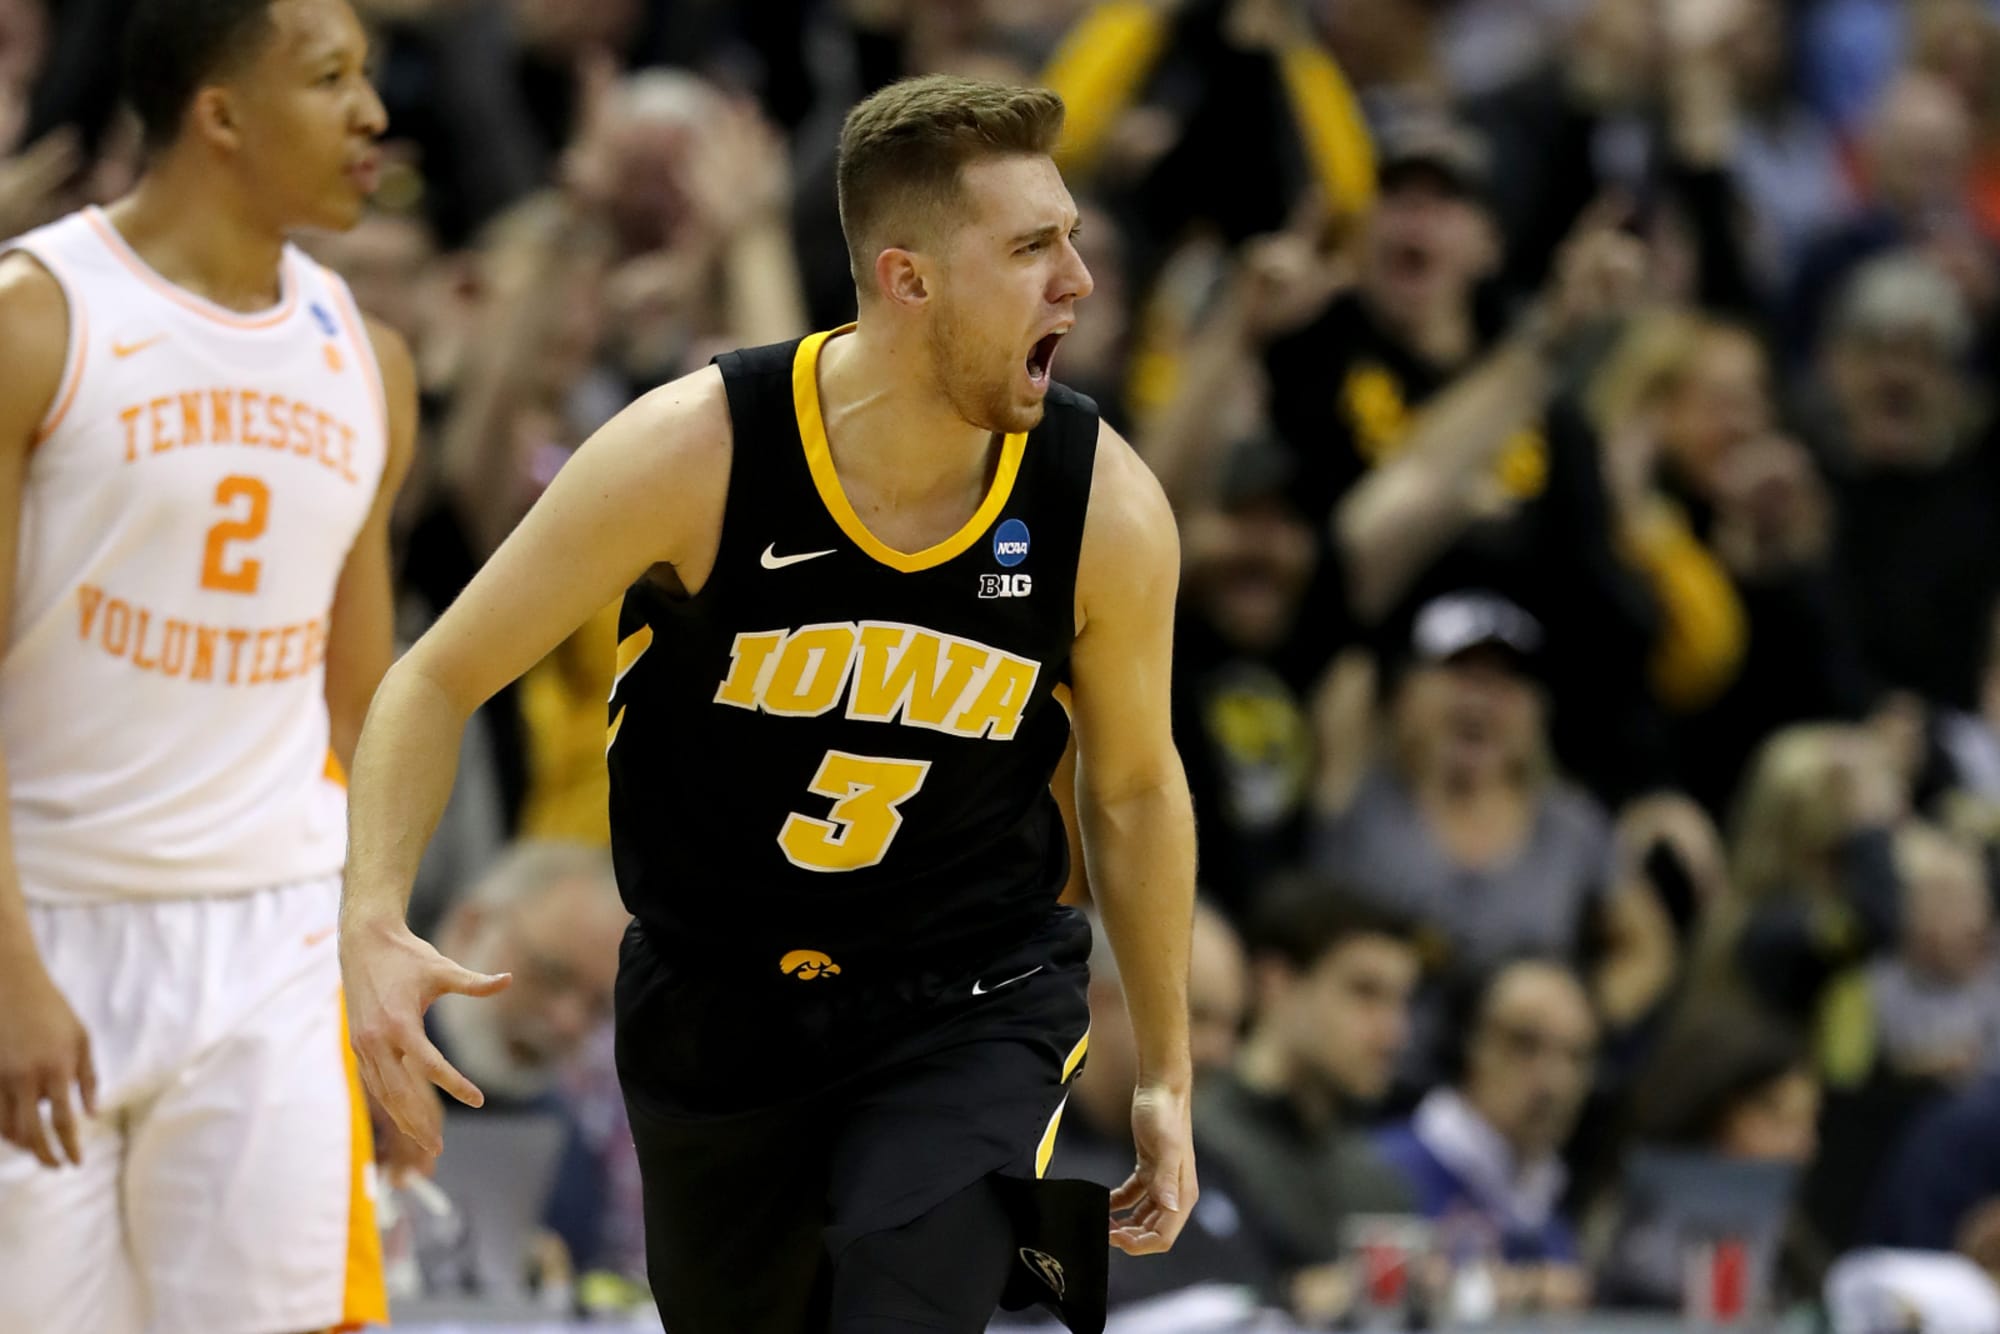 iowa-basketball-full-schedule-release-and-details-for-2020-21